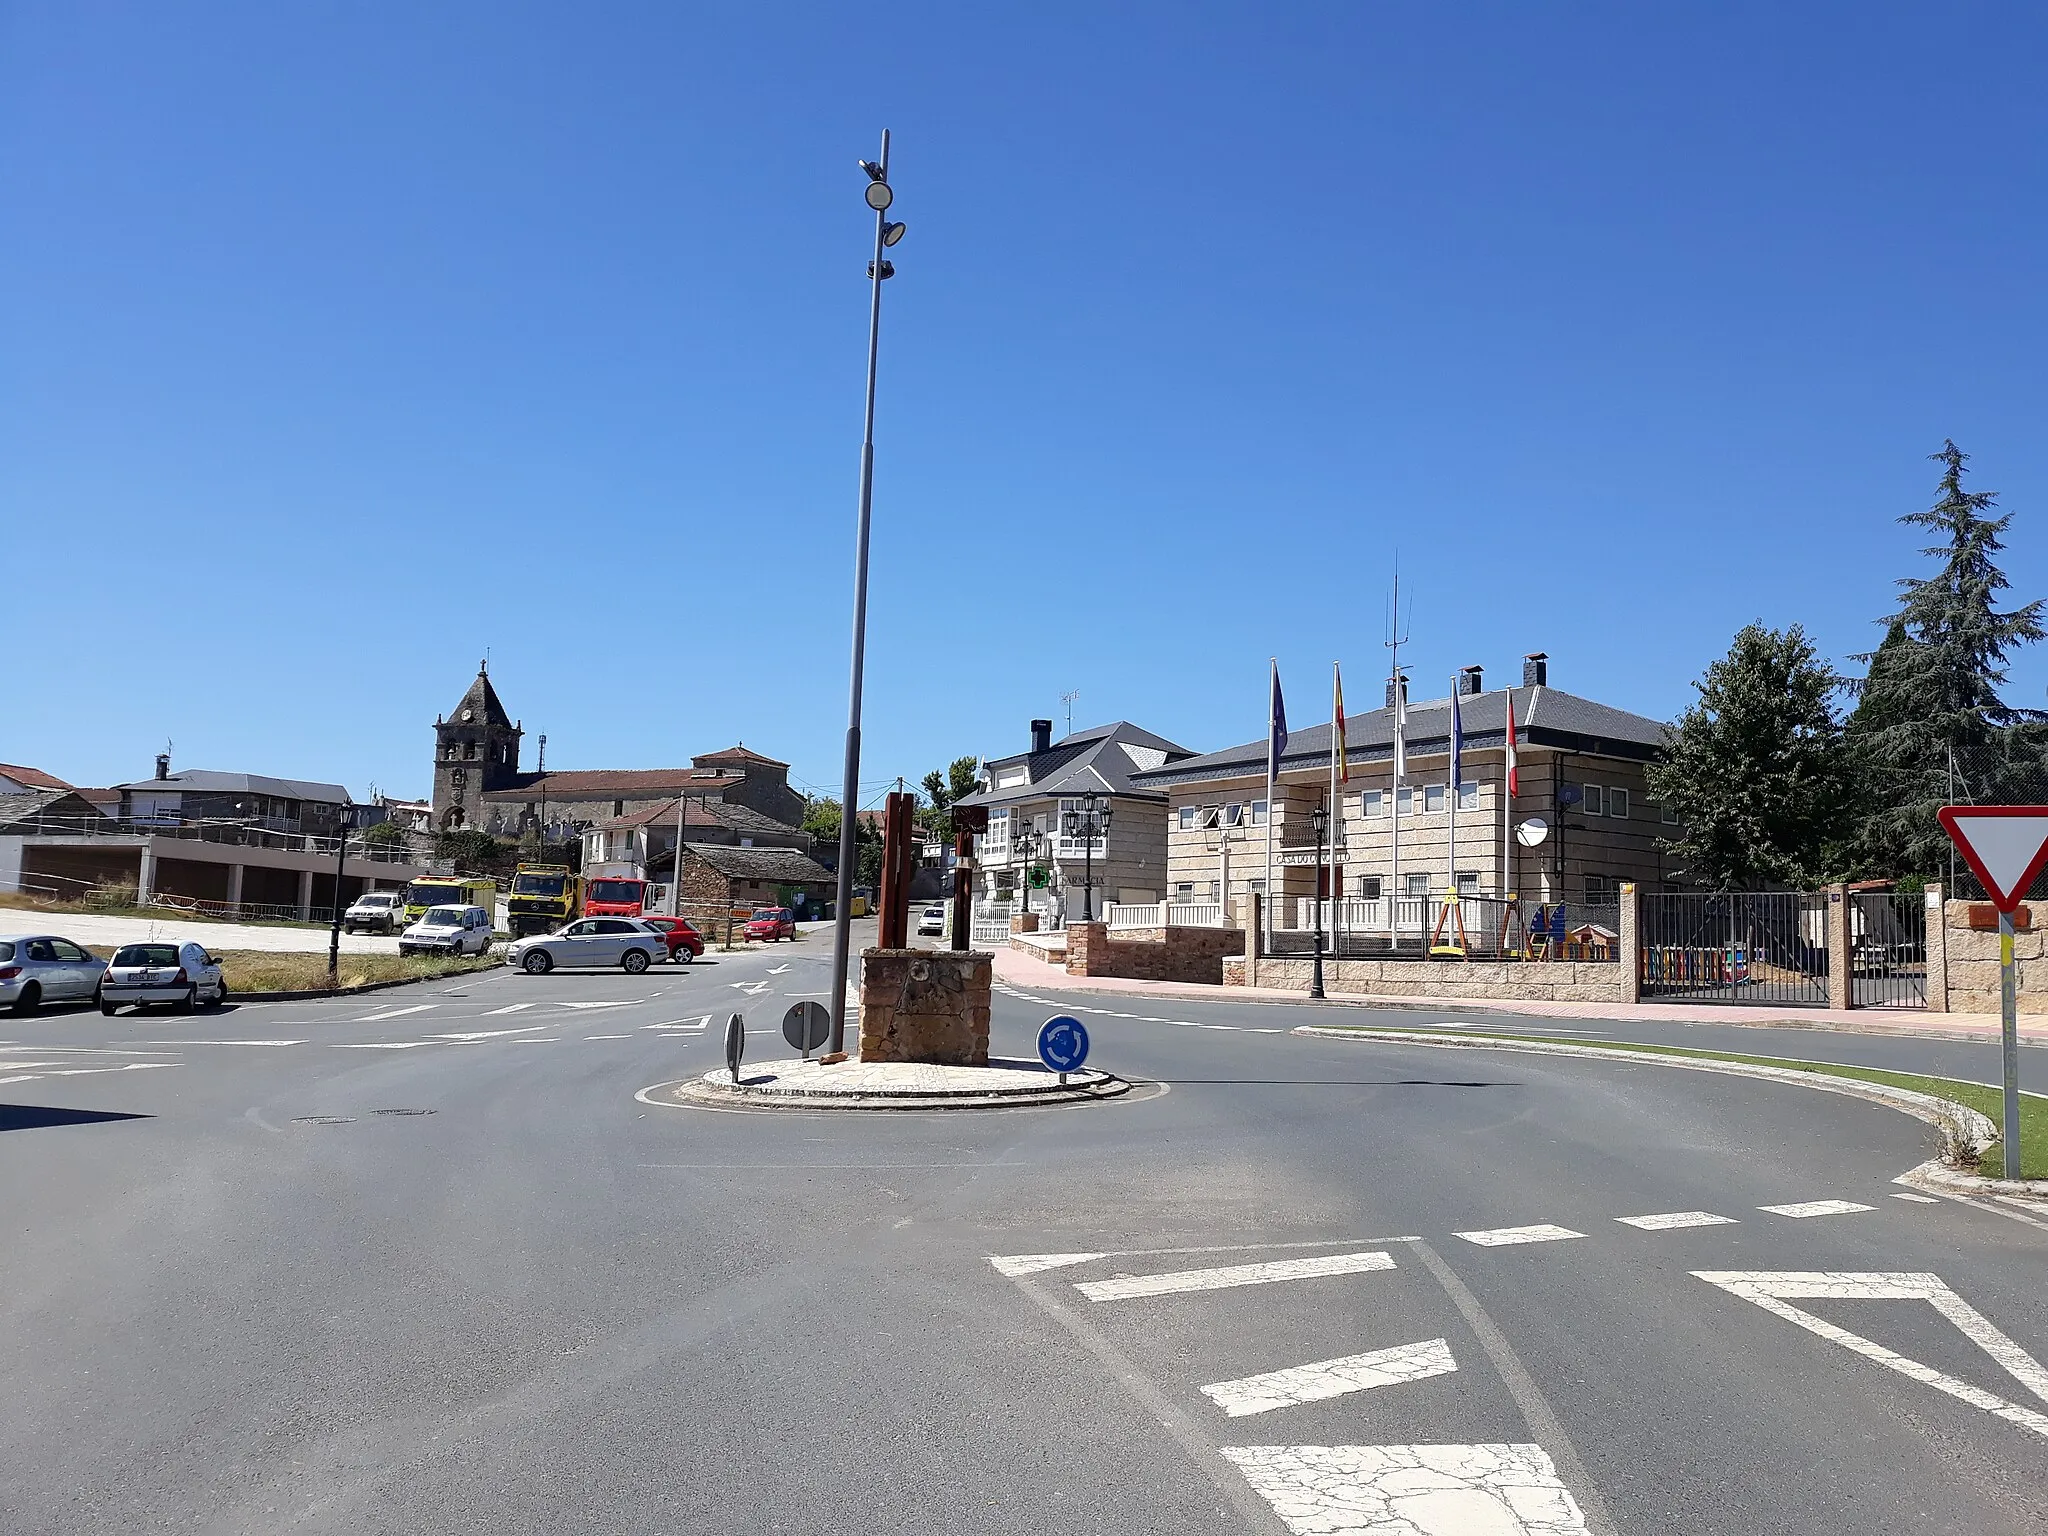 Photo showing: Laza, a small town in Galicia, Spain, with the church and town hall.